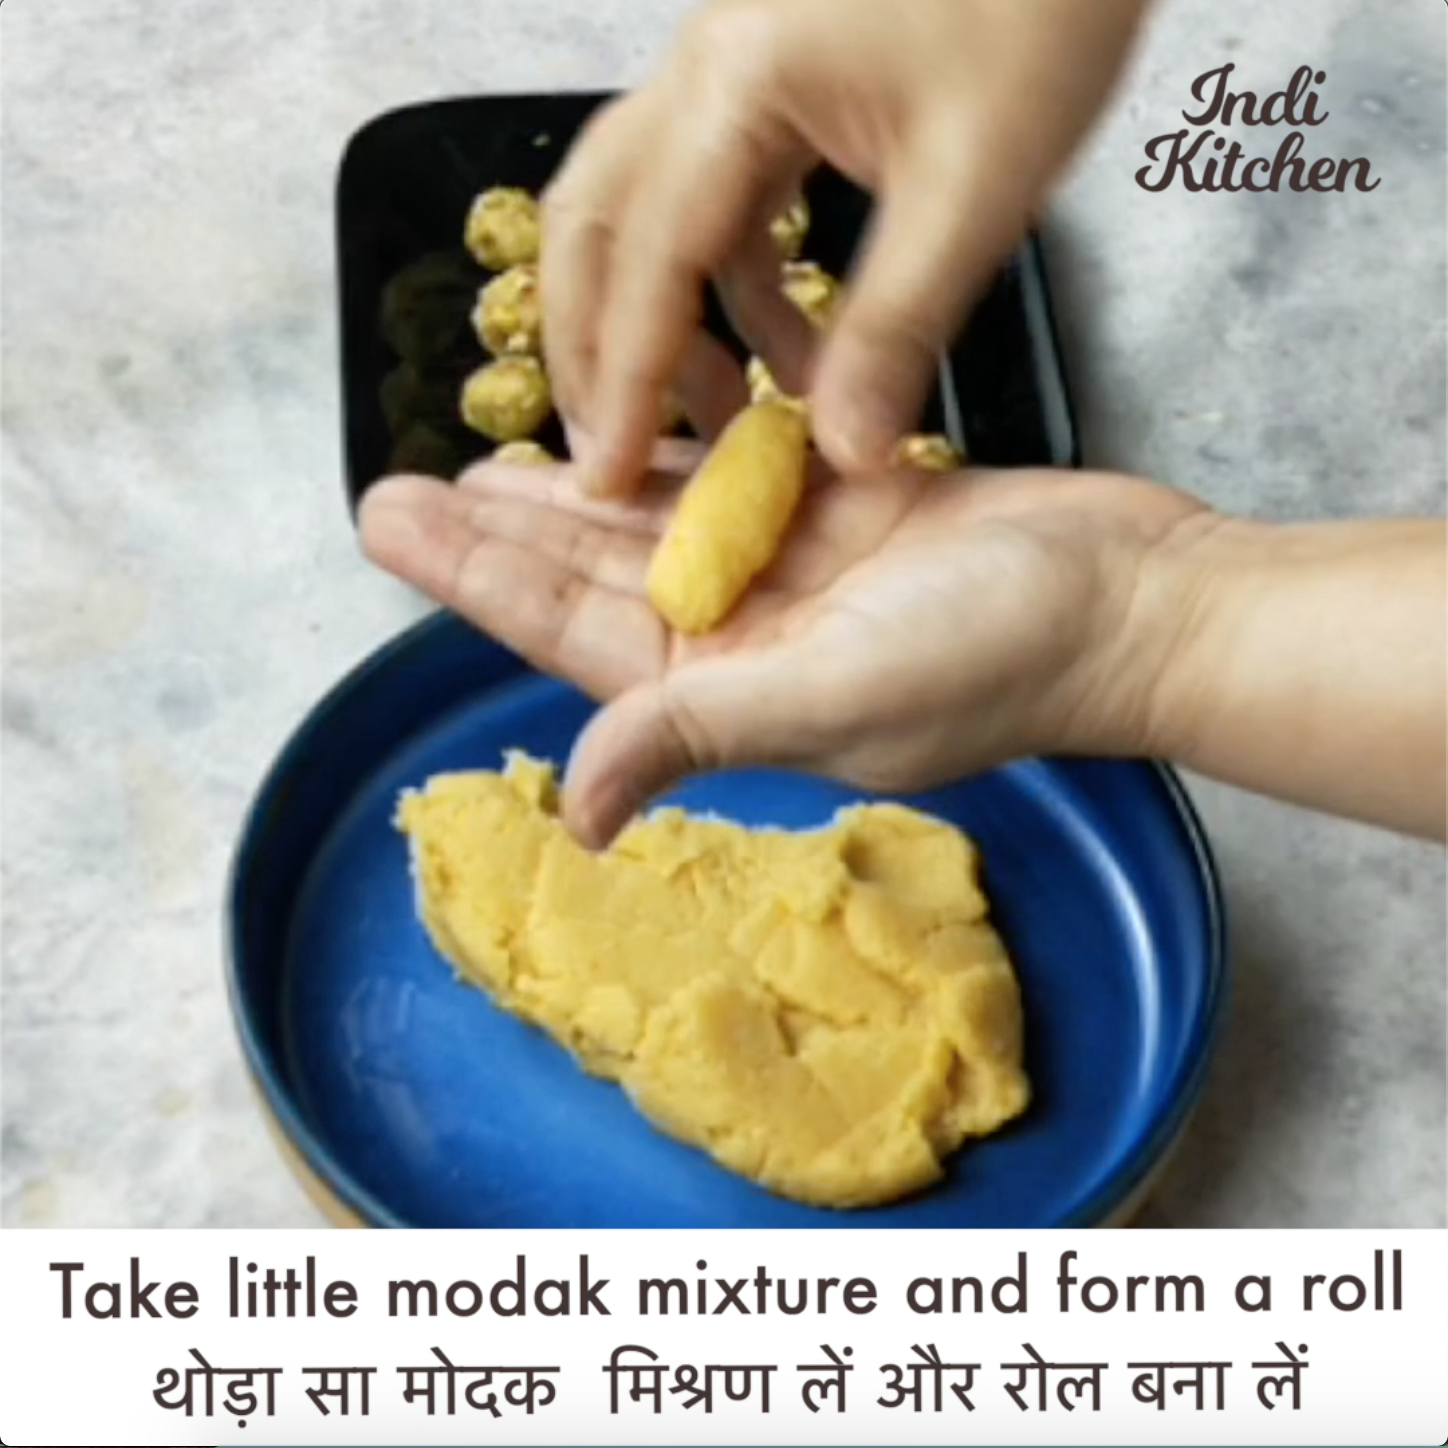 How to make modak at home 